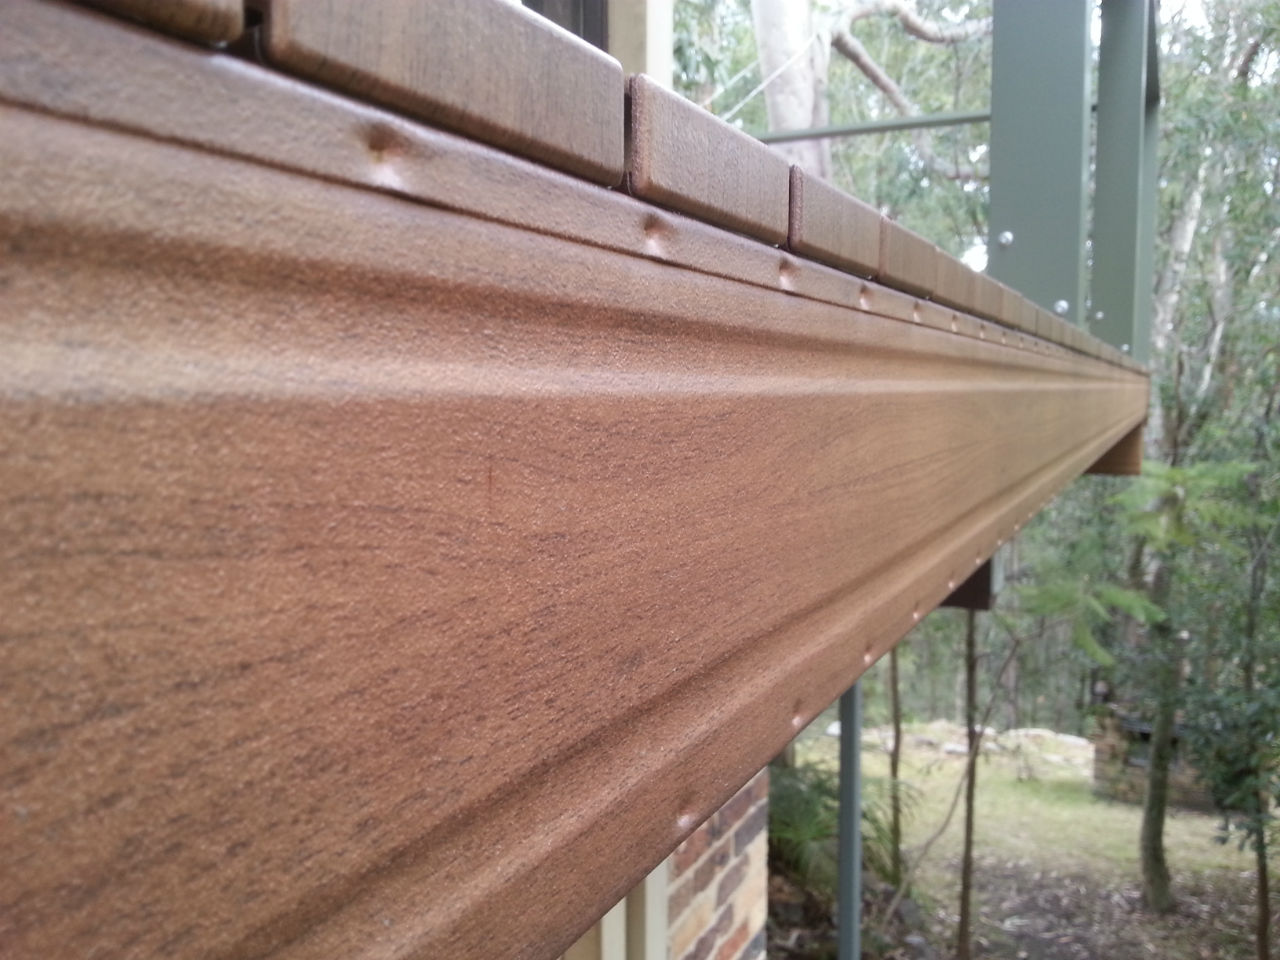 Timber finish to Boxspan bearer in a high bush fire danger area